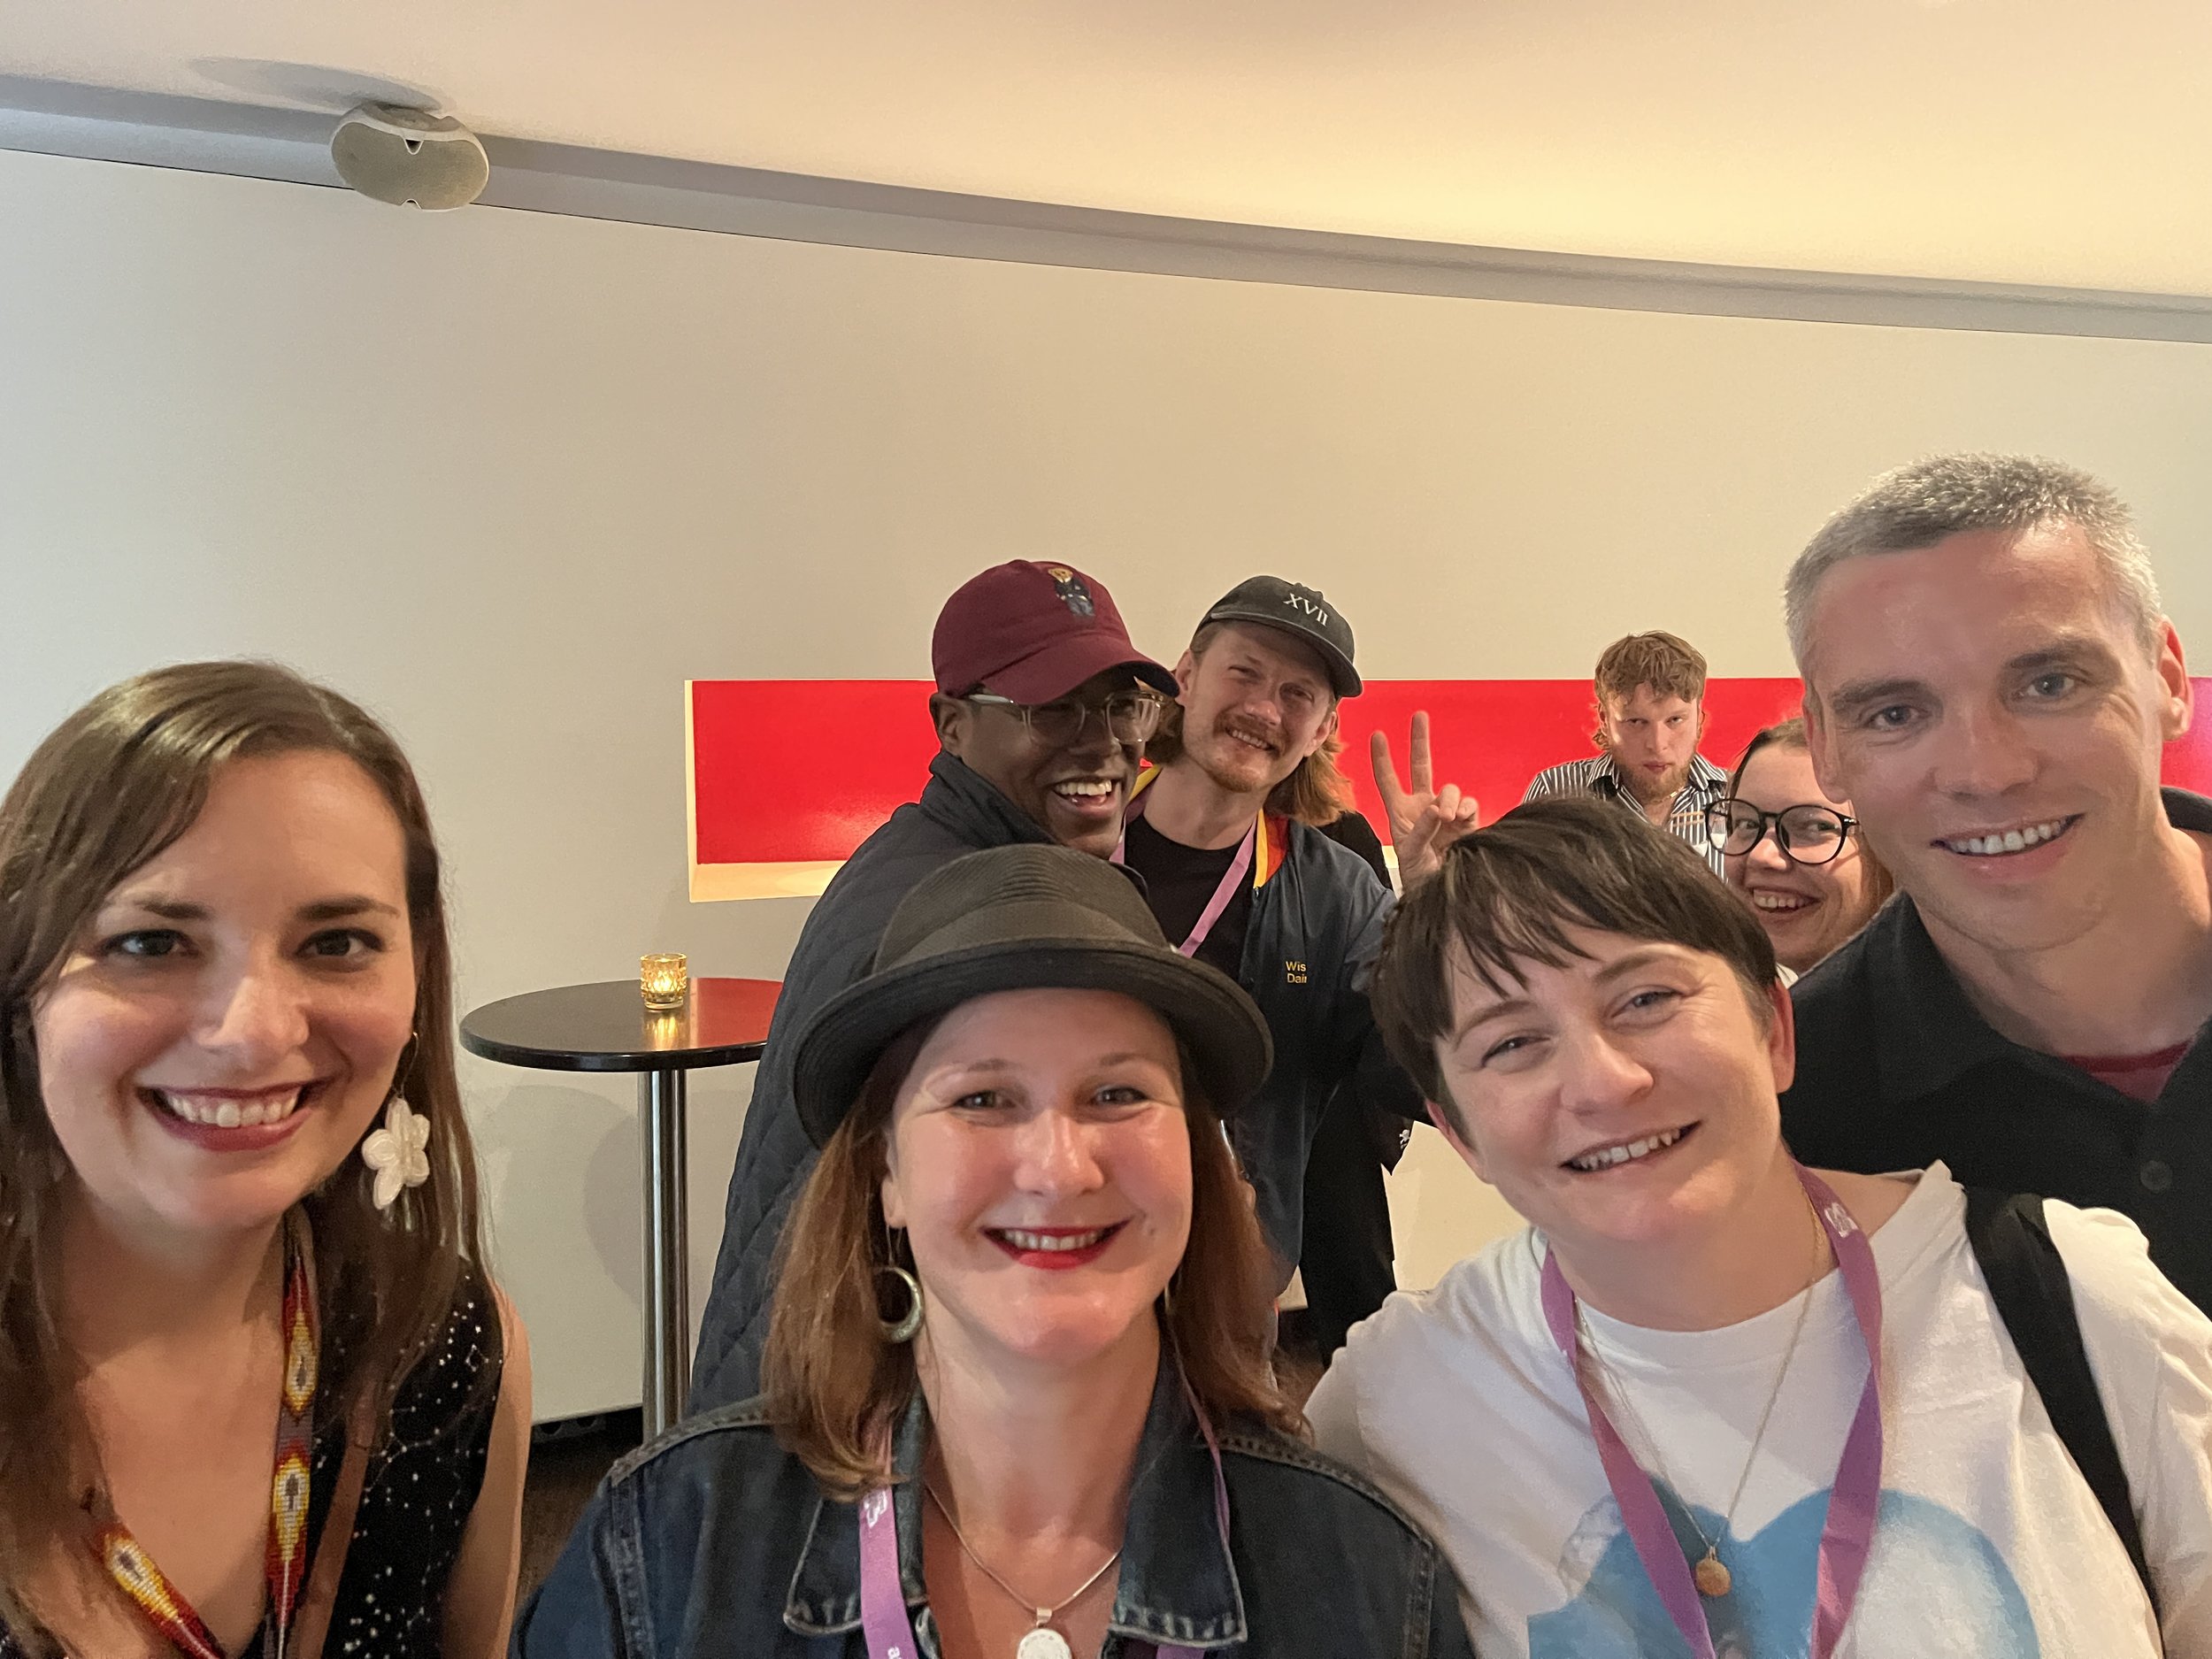  Amie Therrien (Executive Director, MMF Canada), Annabella Coldrick (MMF UK), Maggie Smith - (AAM (Assocation of Artist Managers - Australia)), and mission delegates Omar Lodge, Noah Derkson, and Jenn Doerkson. 